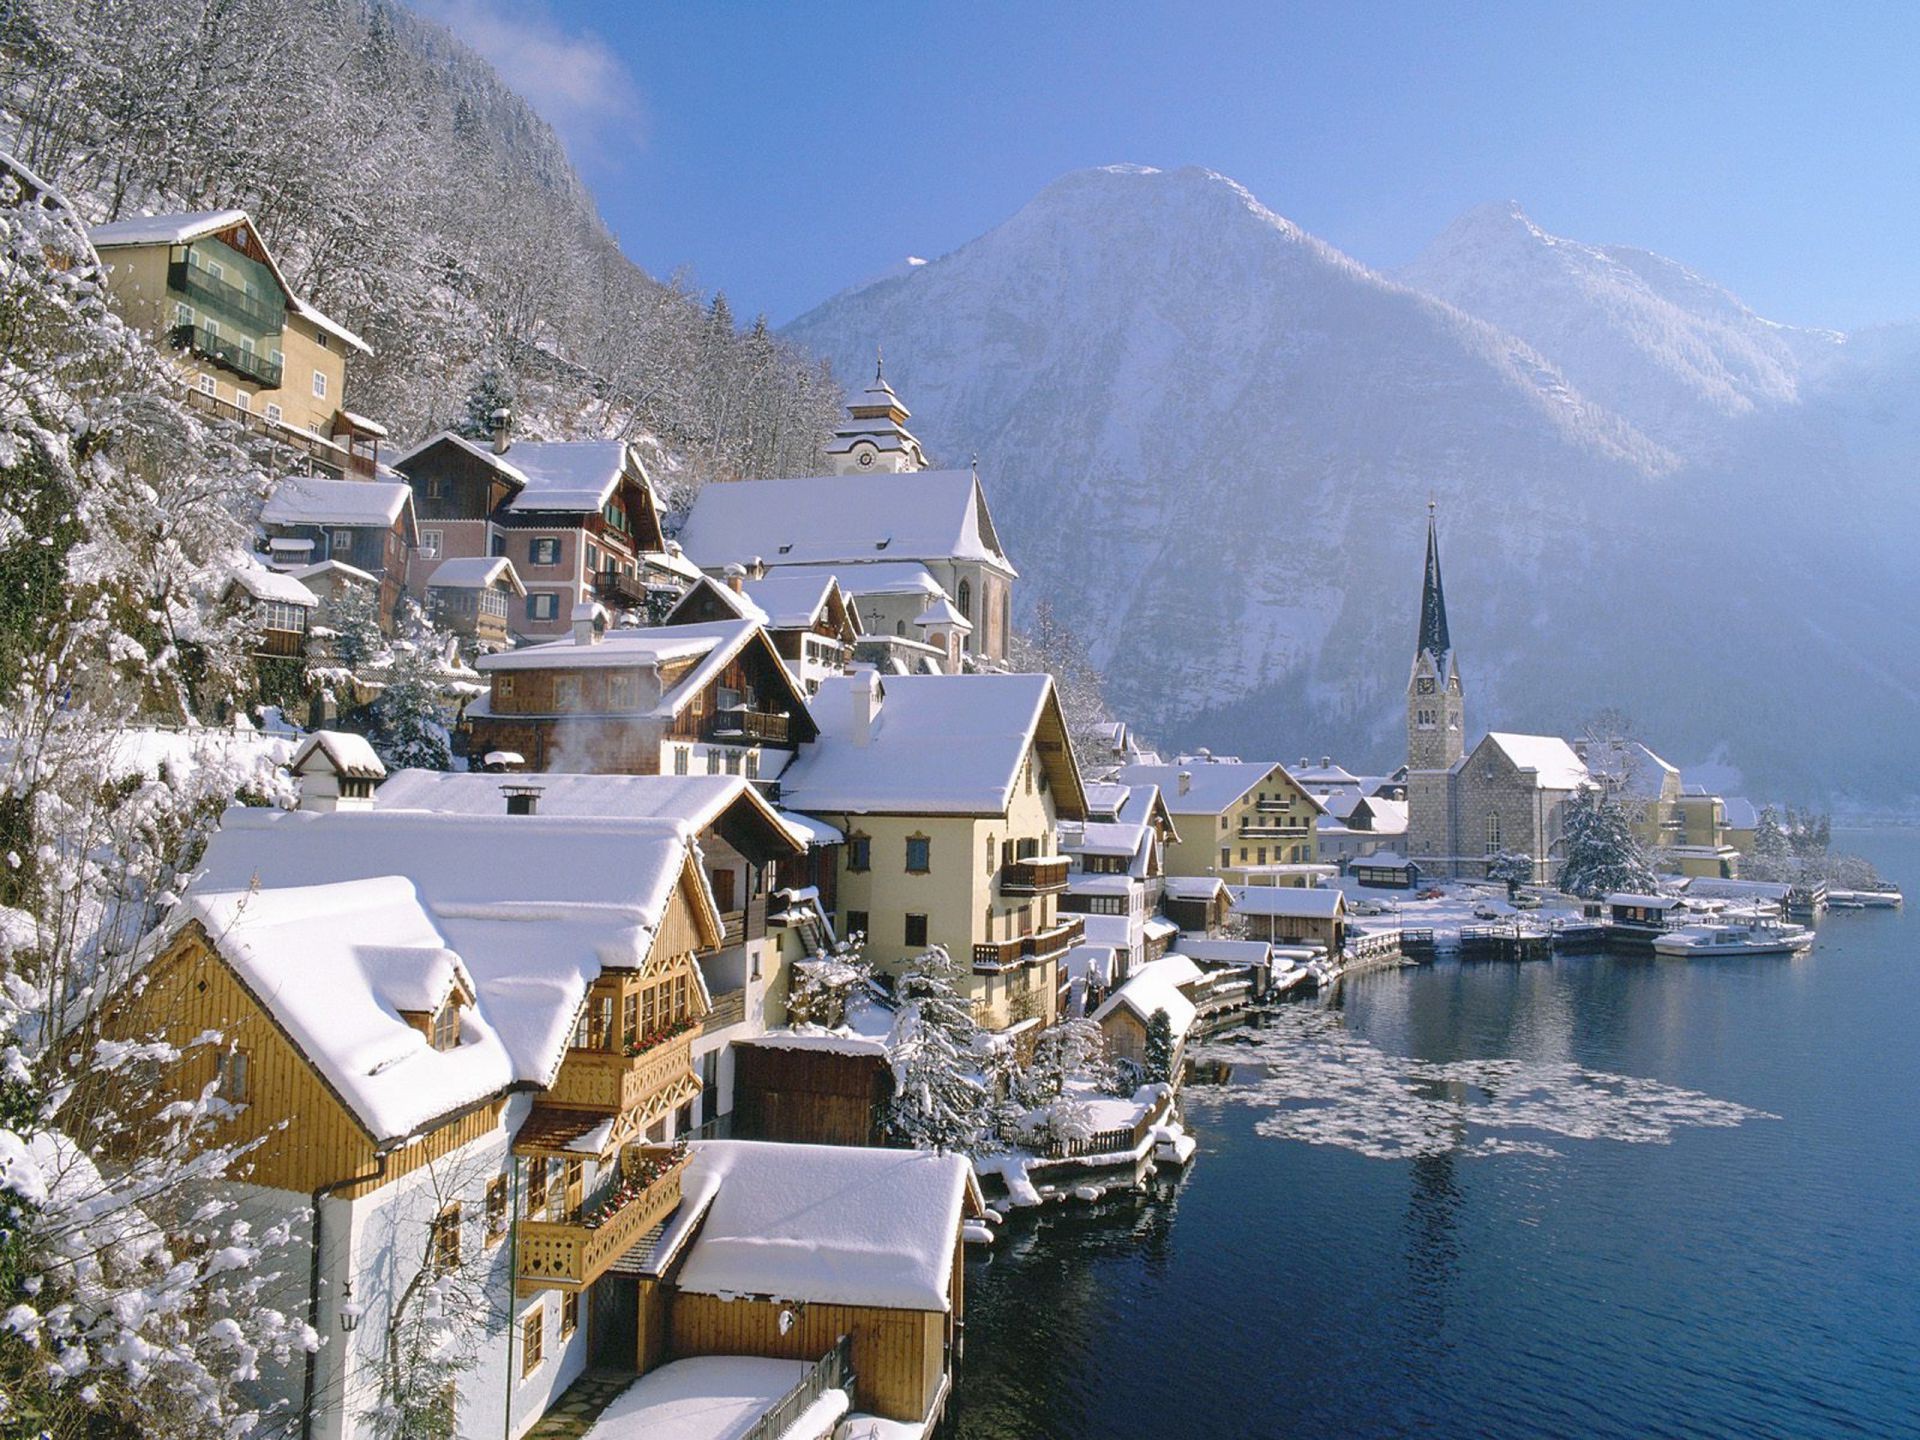 city snow winter travel water outdoors house architecture landscape mountain sky town building resort cold